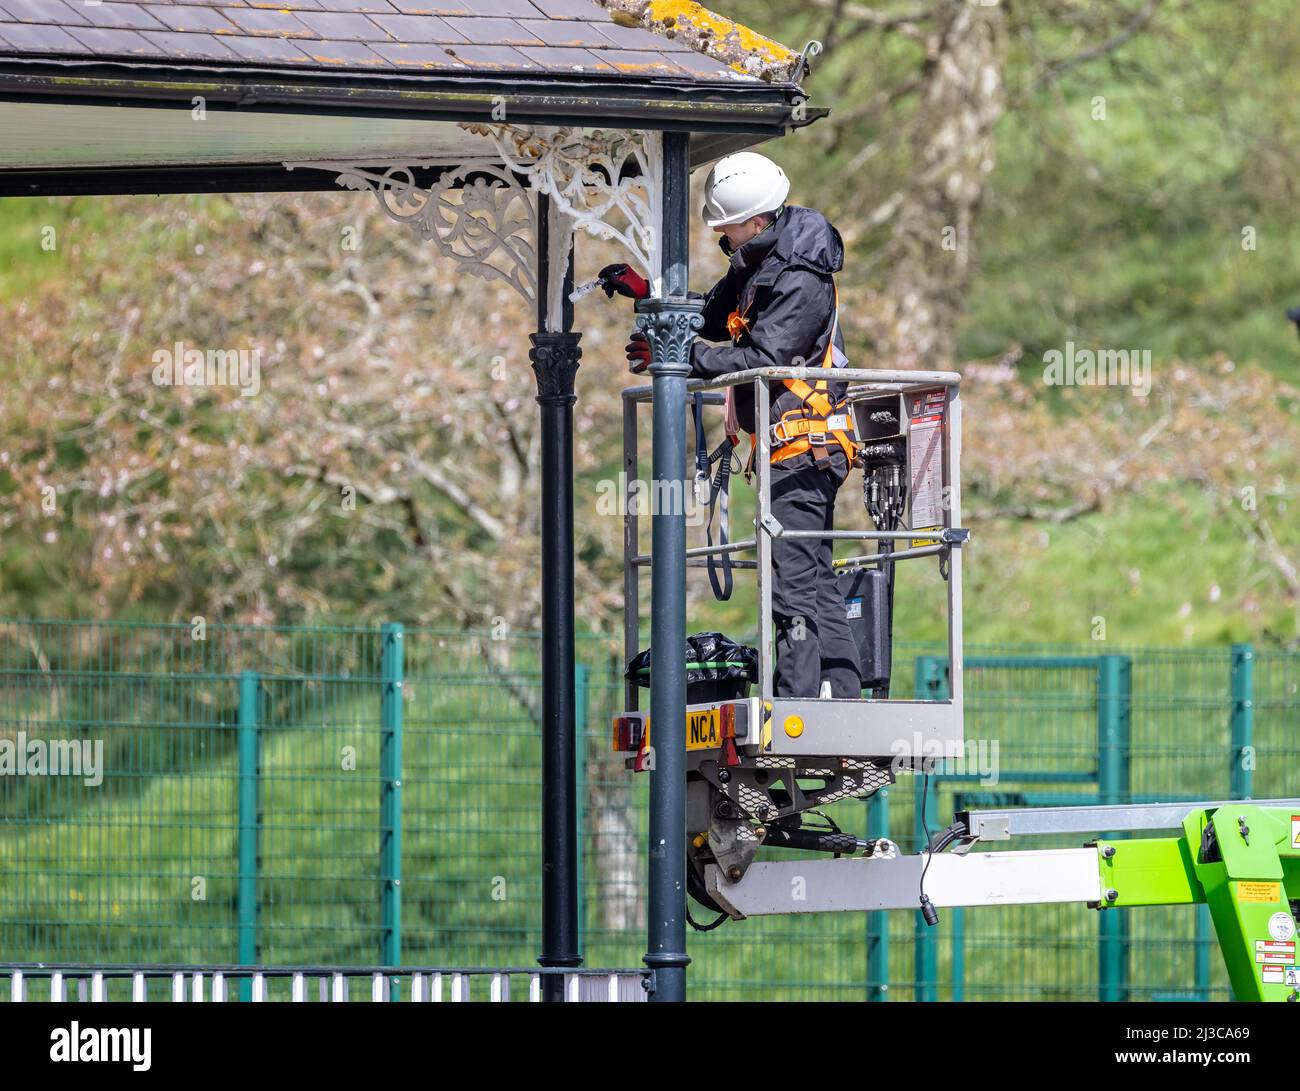 Workman on Cherry Picker with safety harness painting band stand metallwork in Warminster, Wiltshire, UK il 7 aprile 2022 Foto Stock